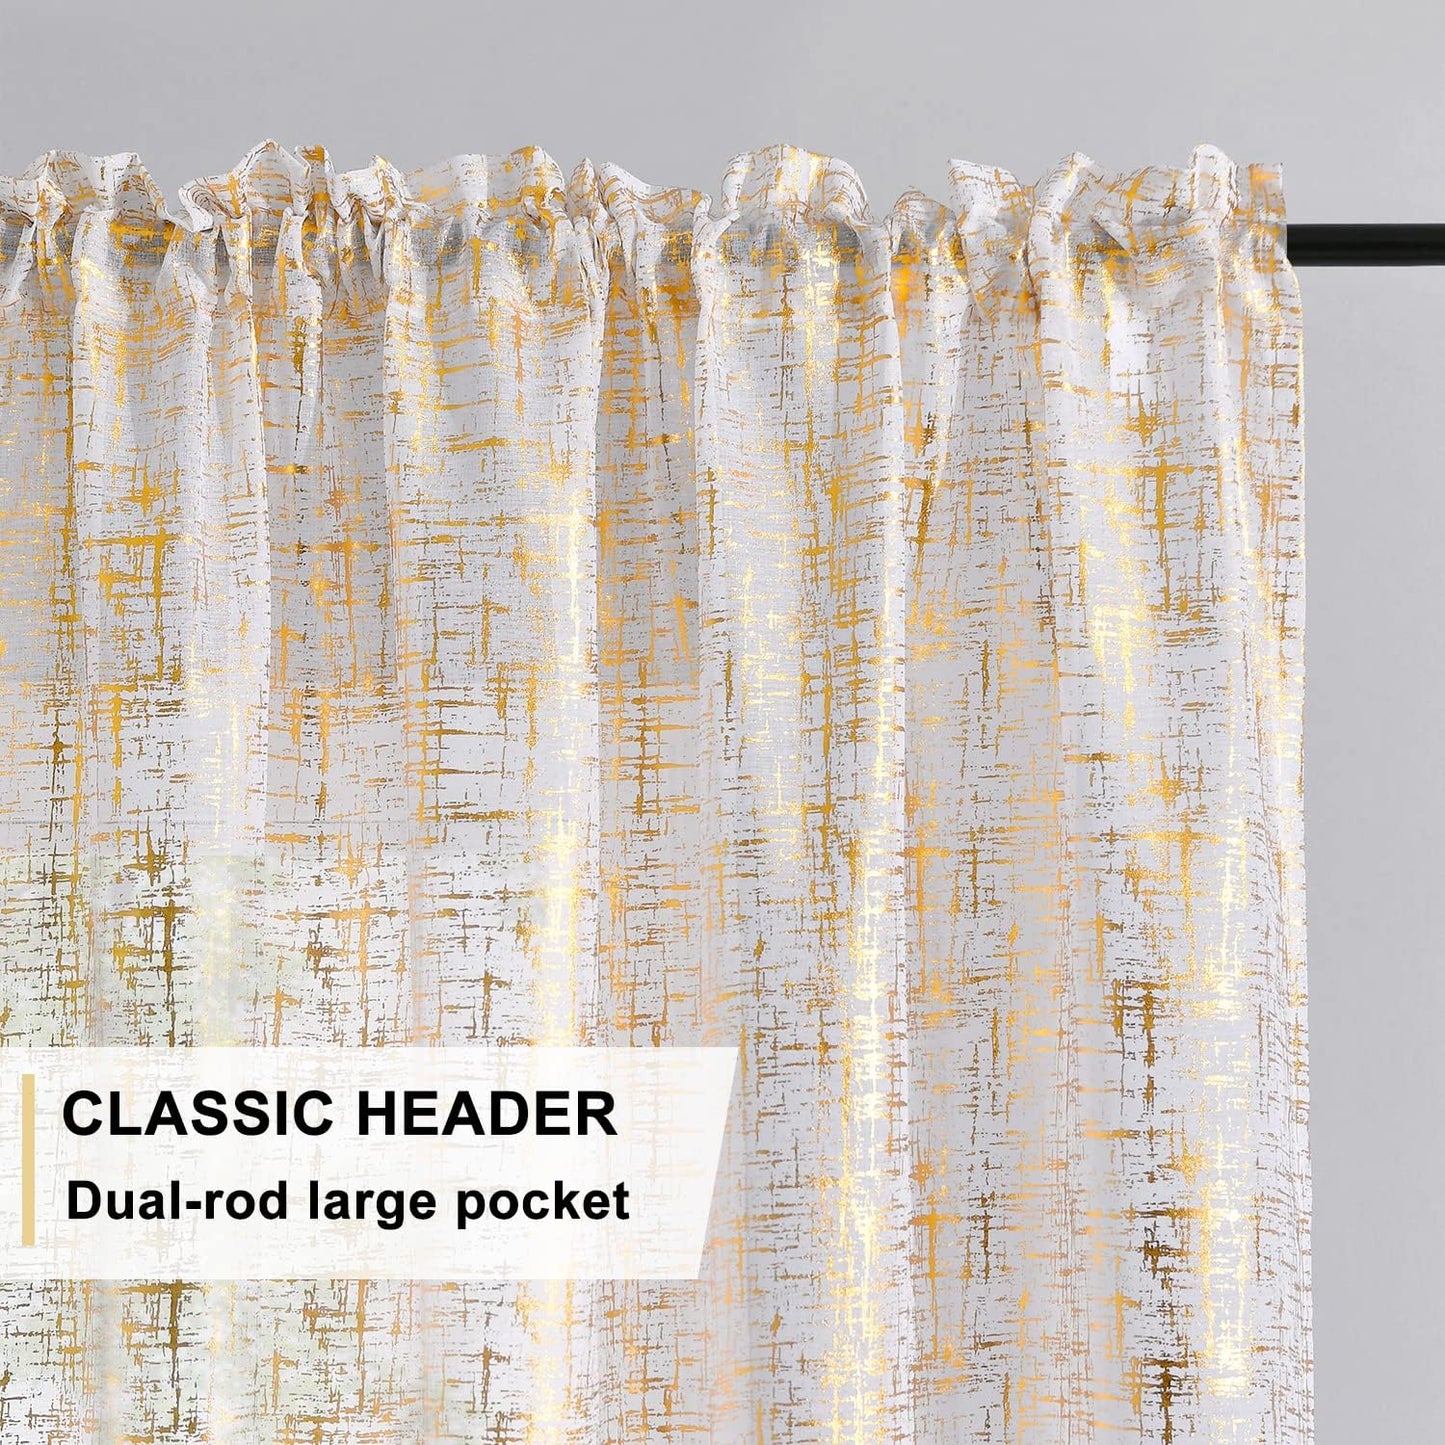 TERLYTEX White Gold Sheer Curtains 84 Inch Length, Metallic Gold Foil Cross Hatch Sparkle Sheer Curtains for Living Room, Rod Pocket Privacy Shimmer Curtains, 52 X 84 Inch, 2 Panels, Gold White  TERLYTEX   